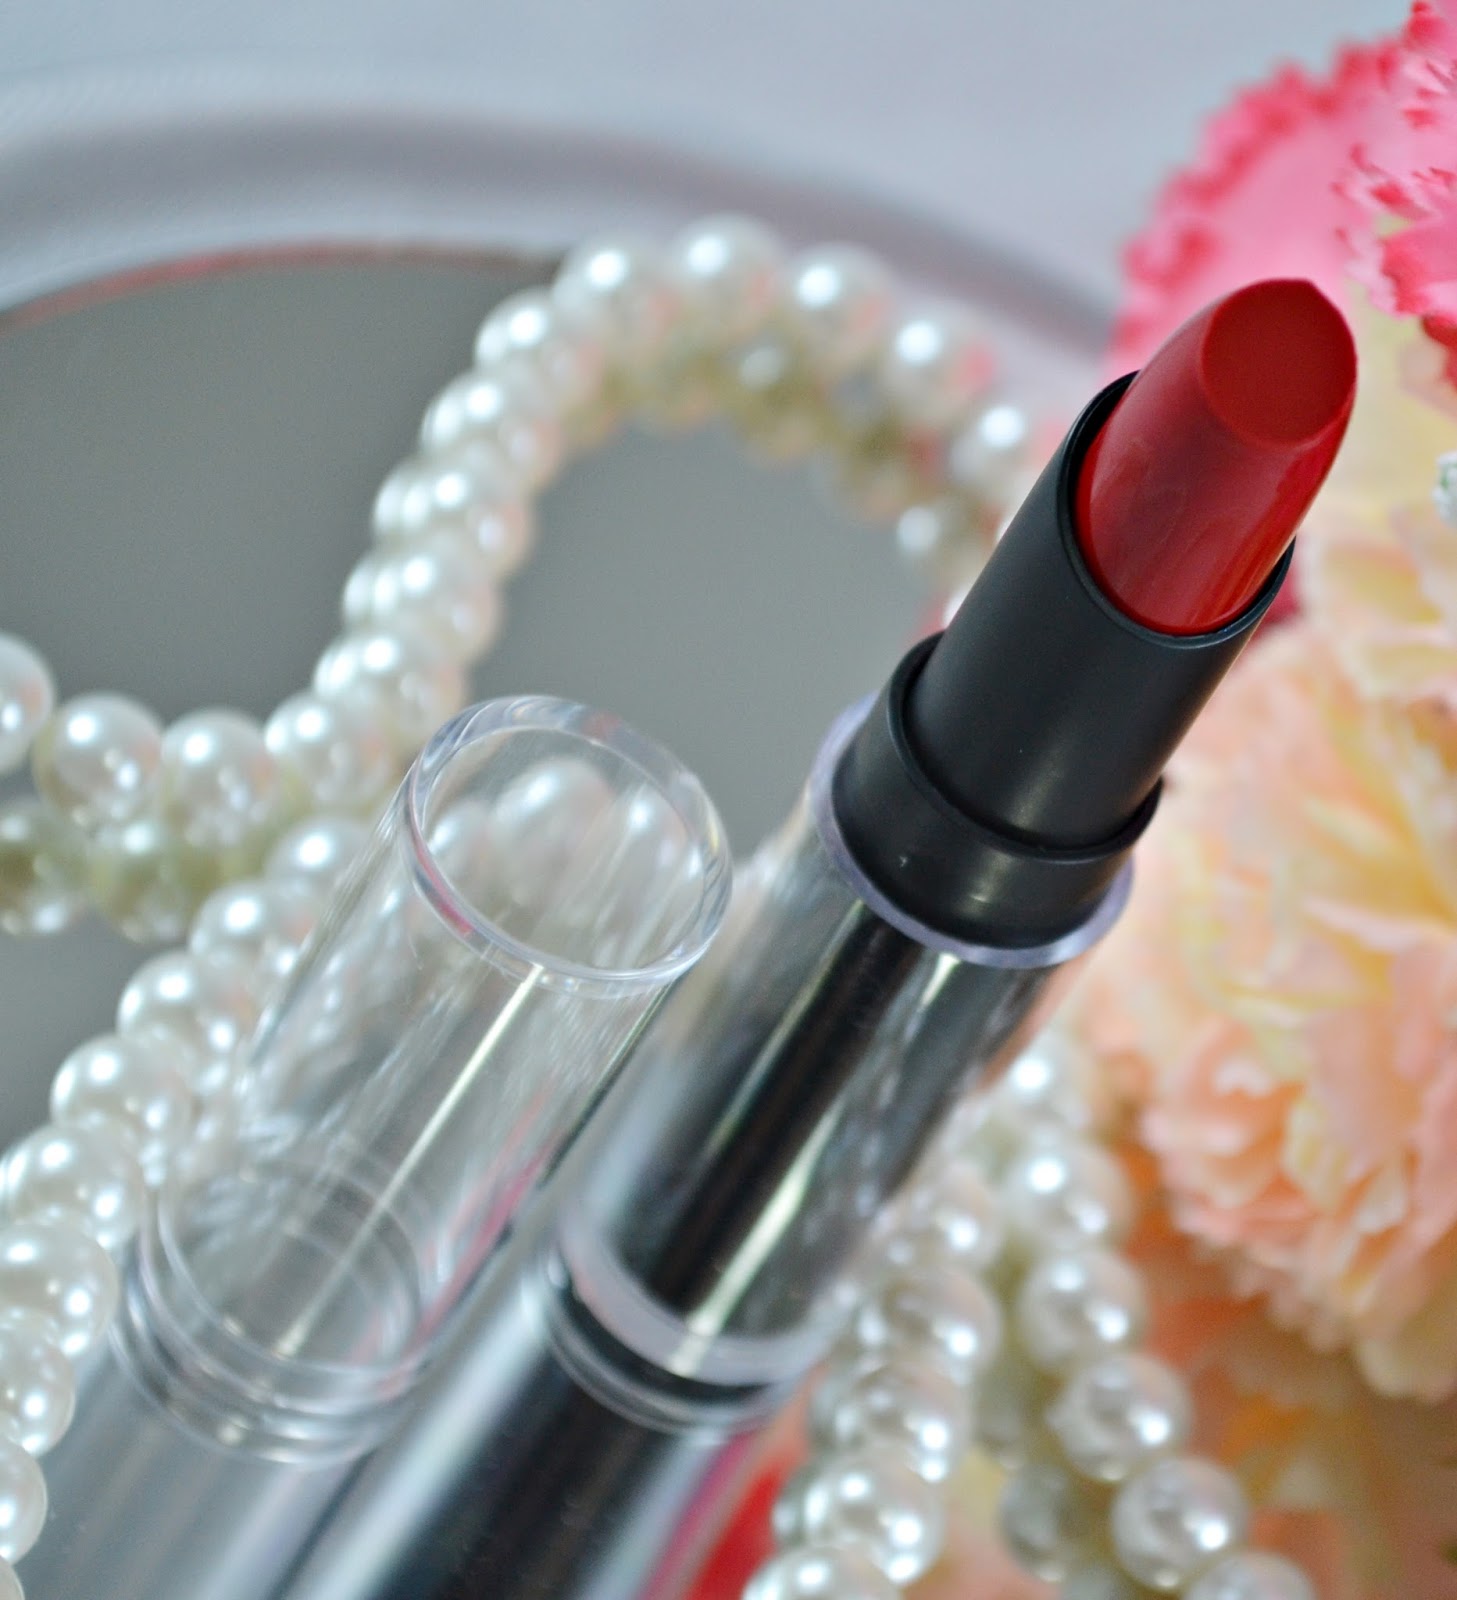 BYS Cosmetics: Tango  All About Beauty 101